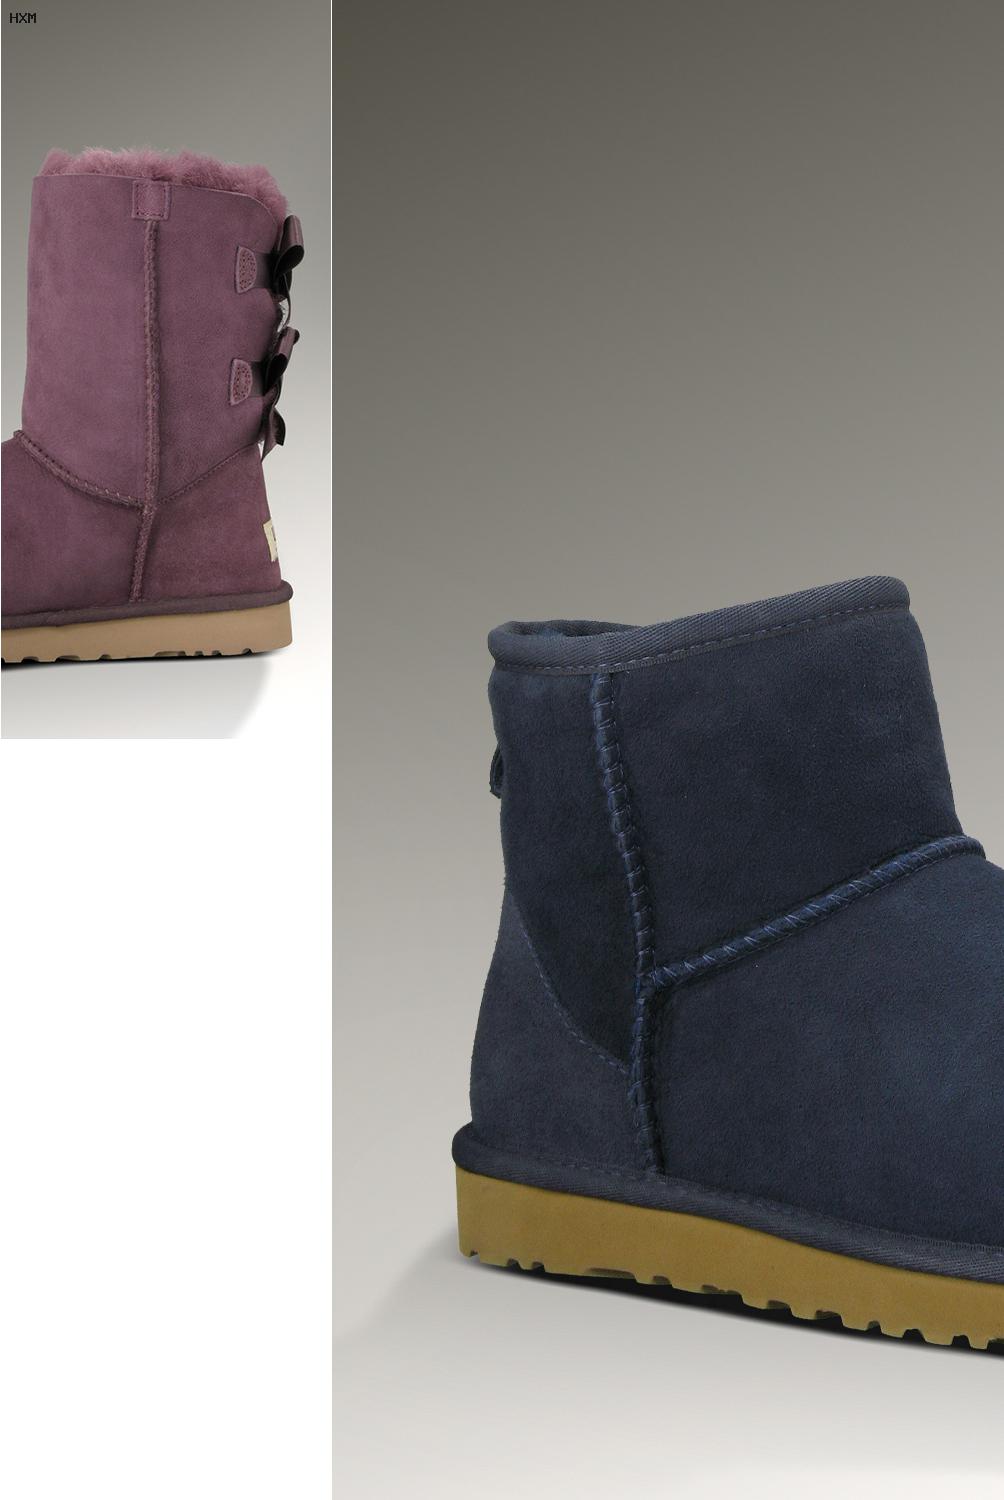 where to buy original ugg boots in melbourne